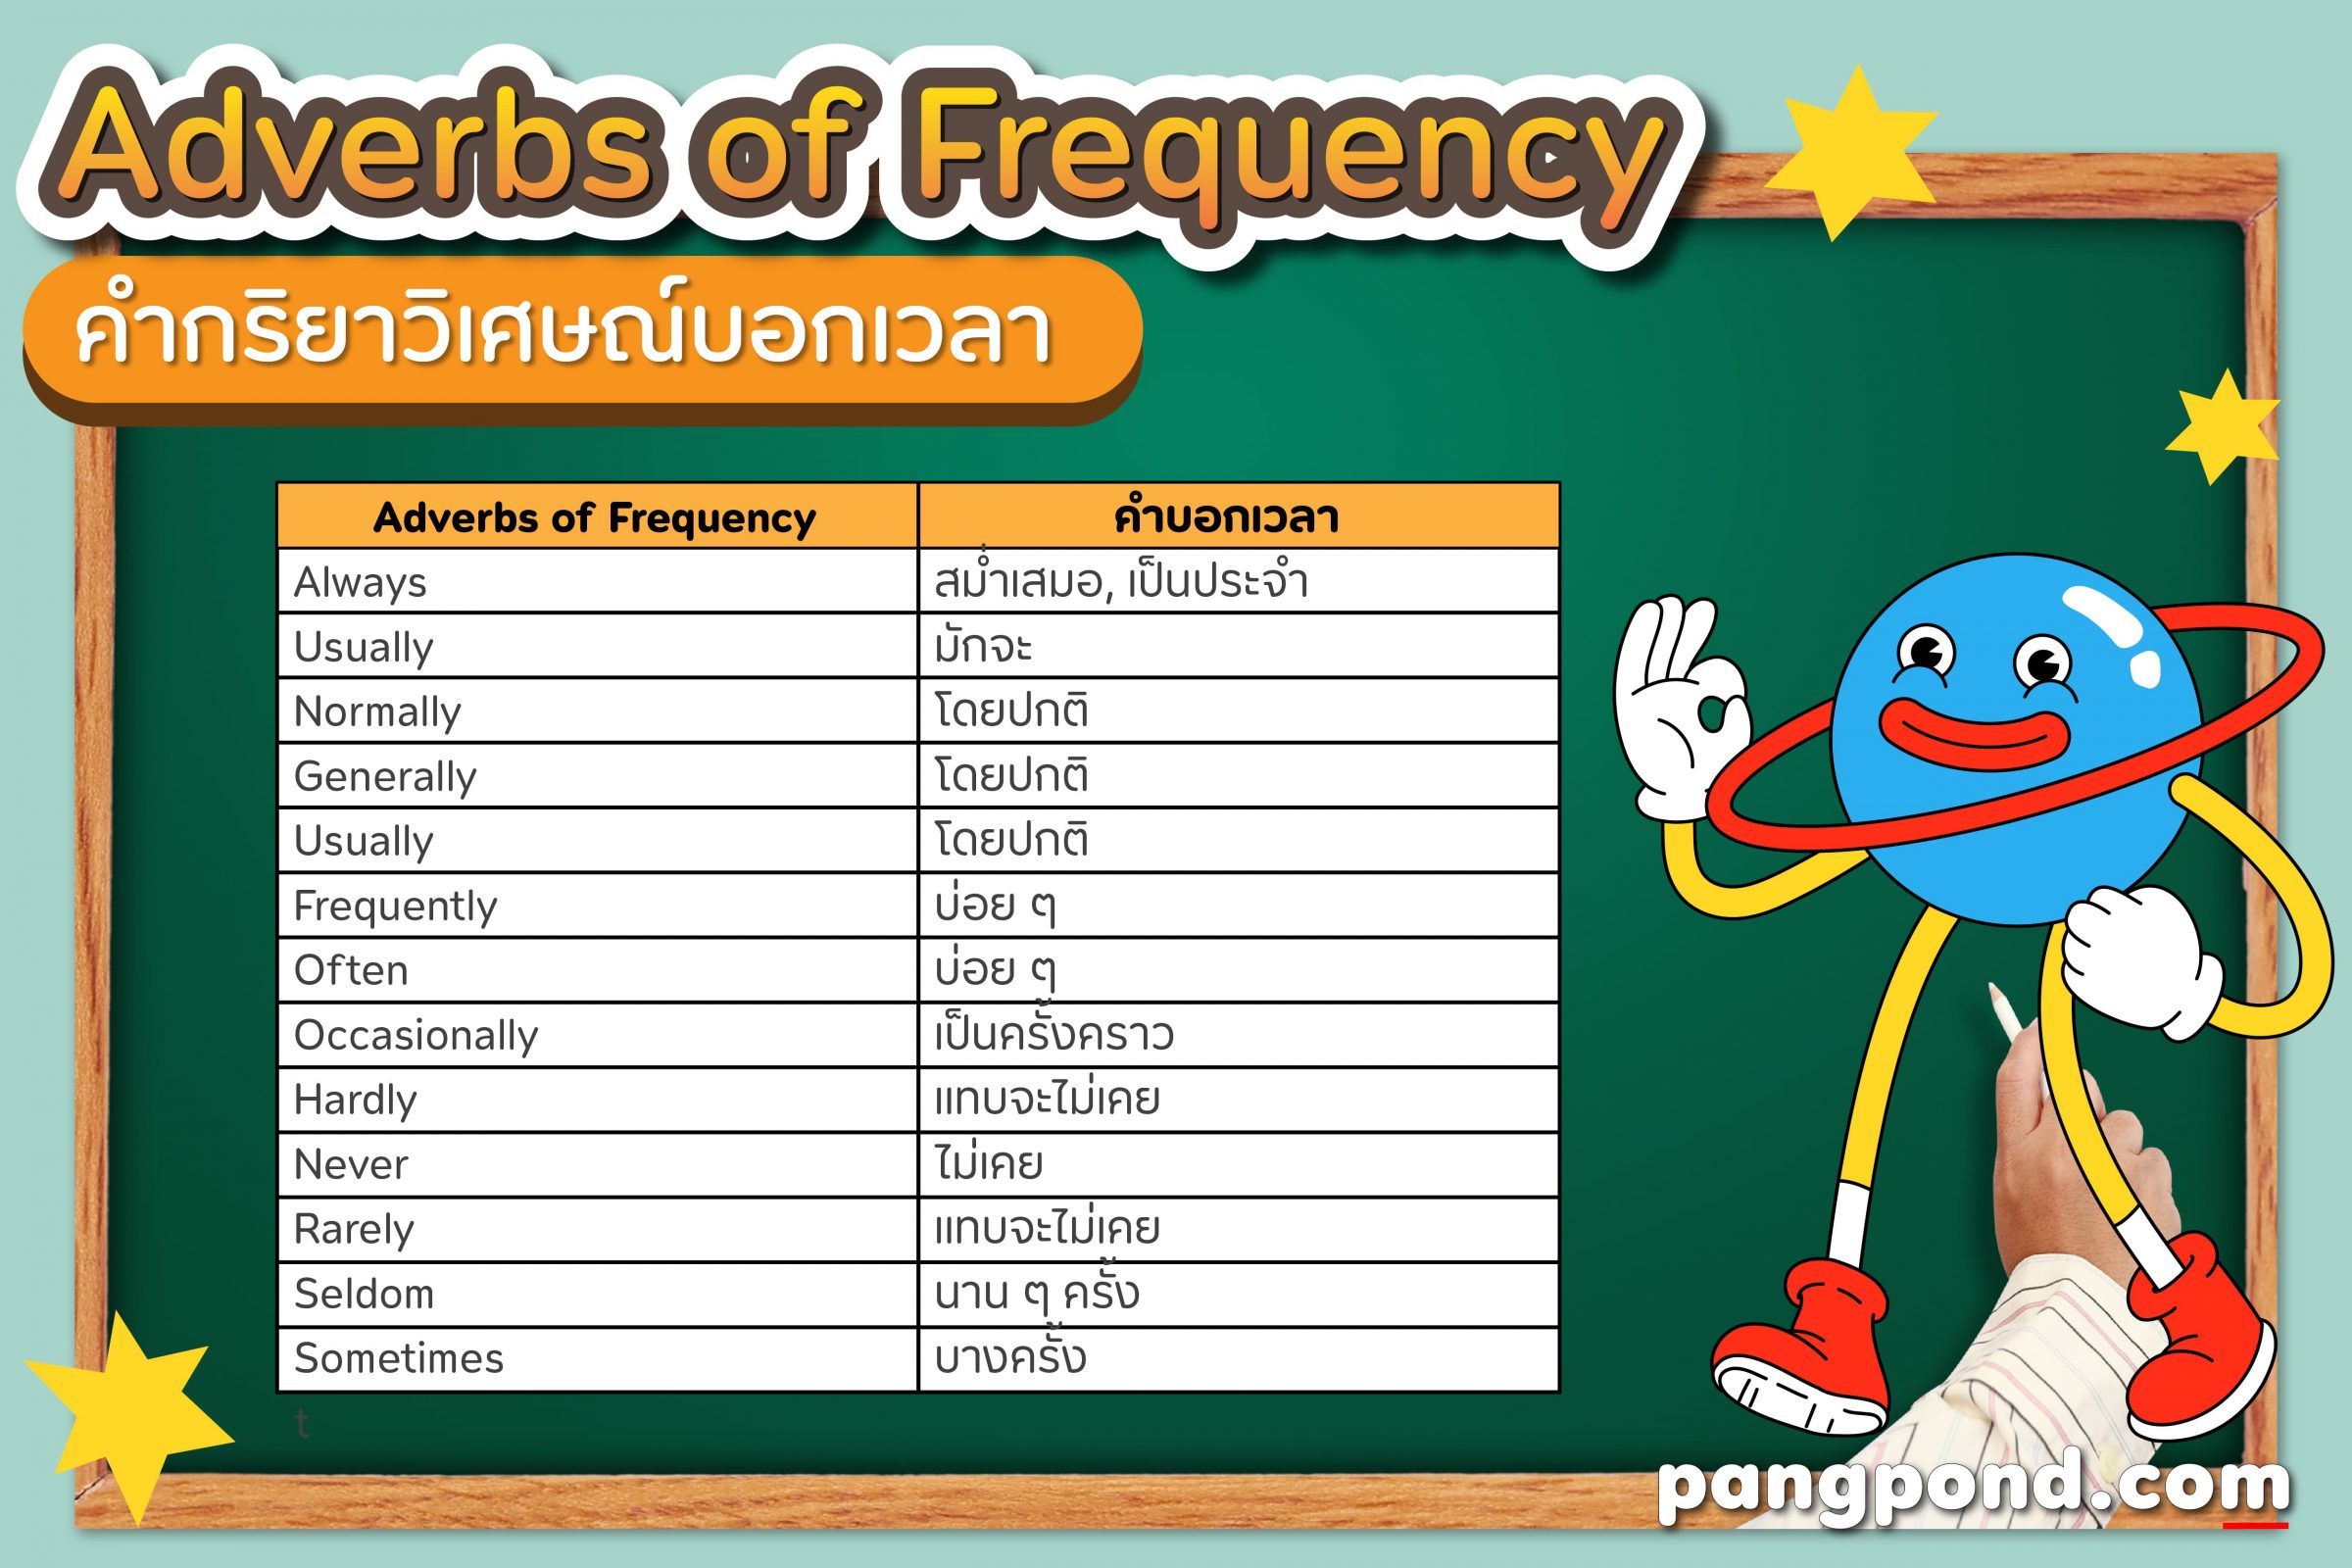 adverbs of frequency คือ